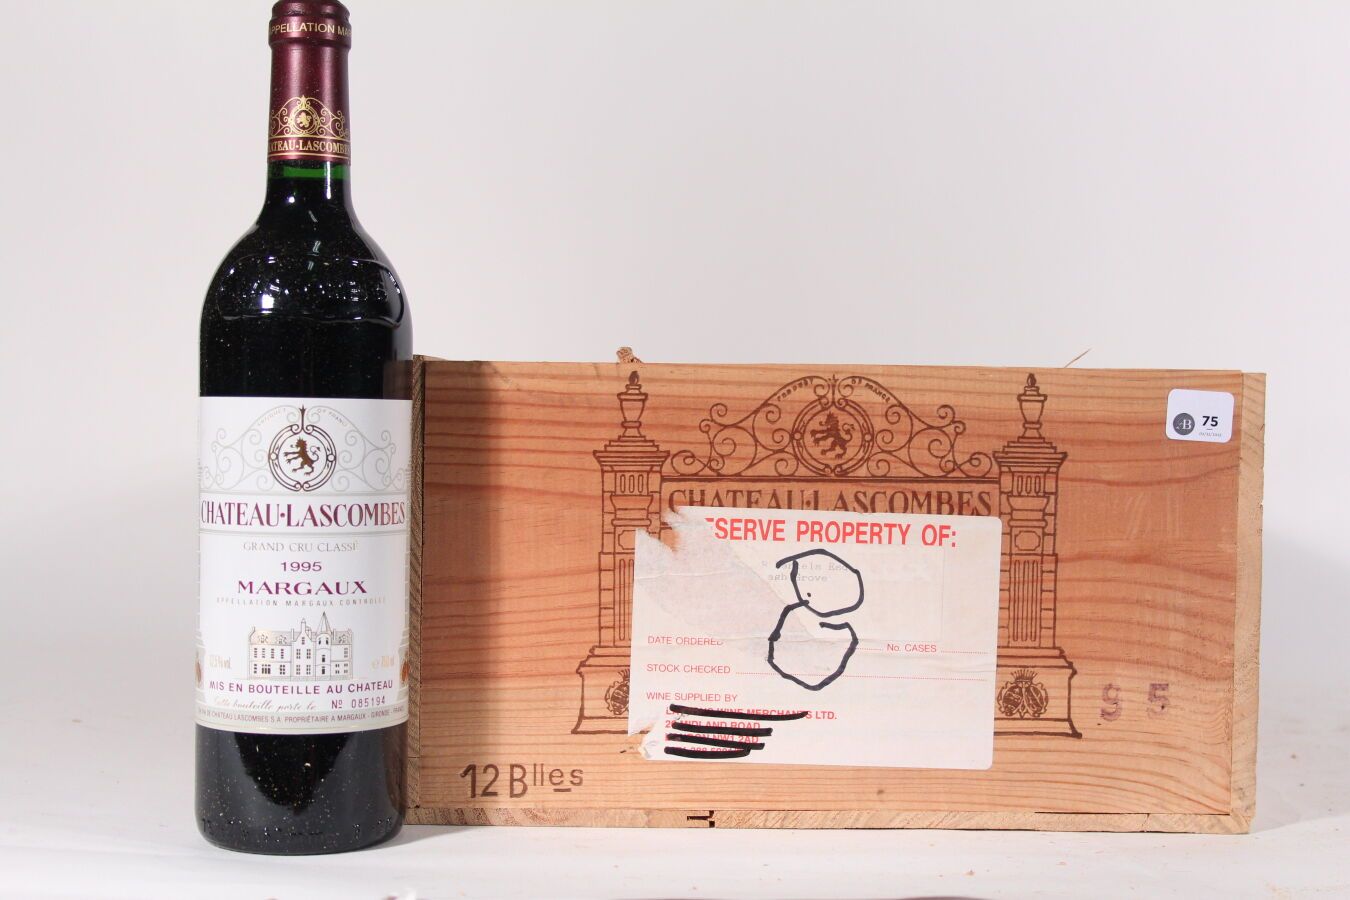 Null 1995 - Château Lascombes
Rosso Margaux - 12 bottiglie CBO